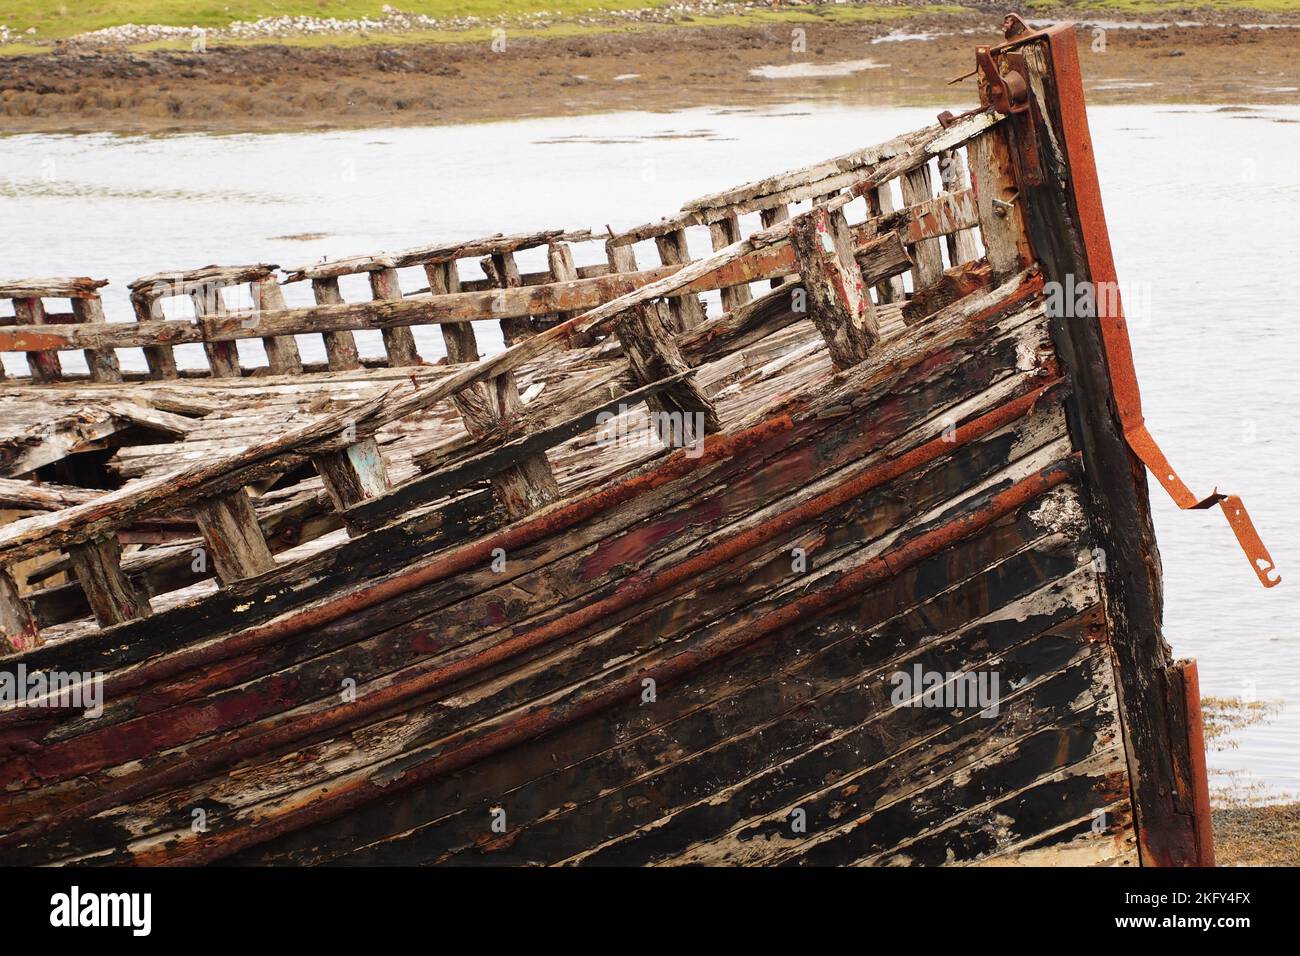 An large, old, wrecked wooden boat, in dry dock, showing the rotting timbers, nuts and bolts and metal as it is slowly disintigrating Stock Photo